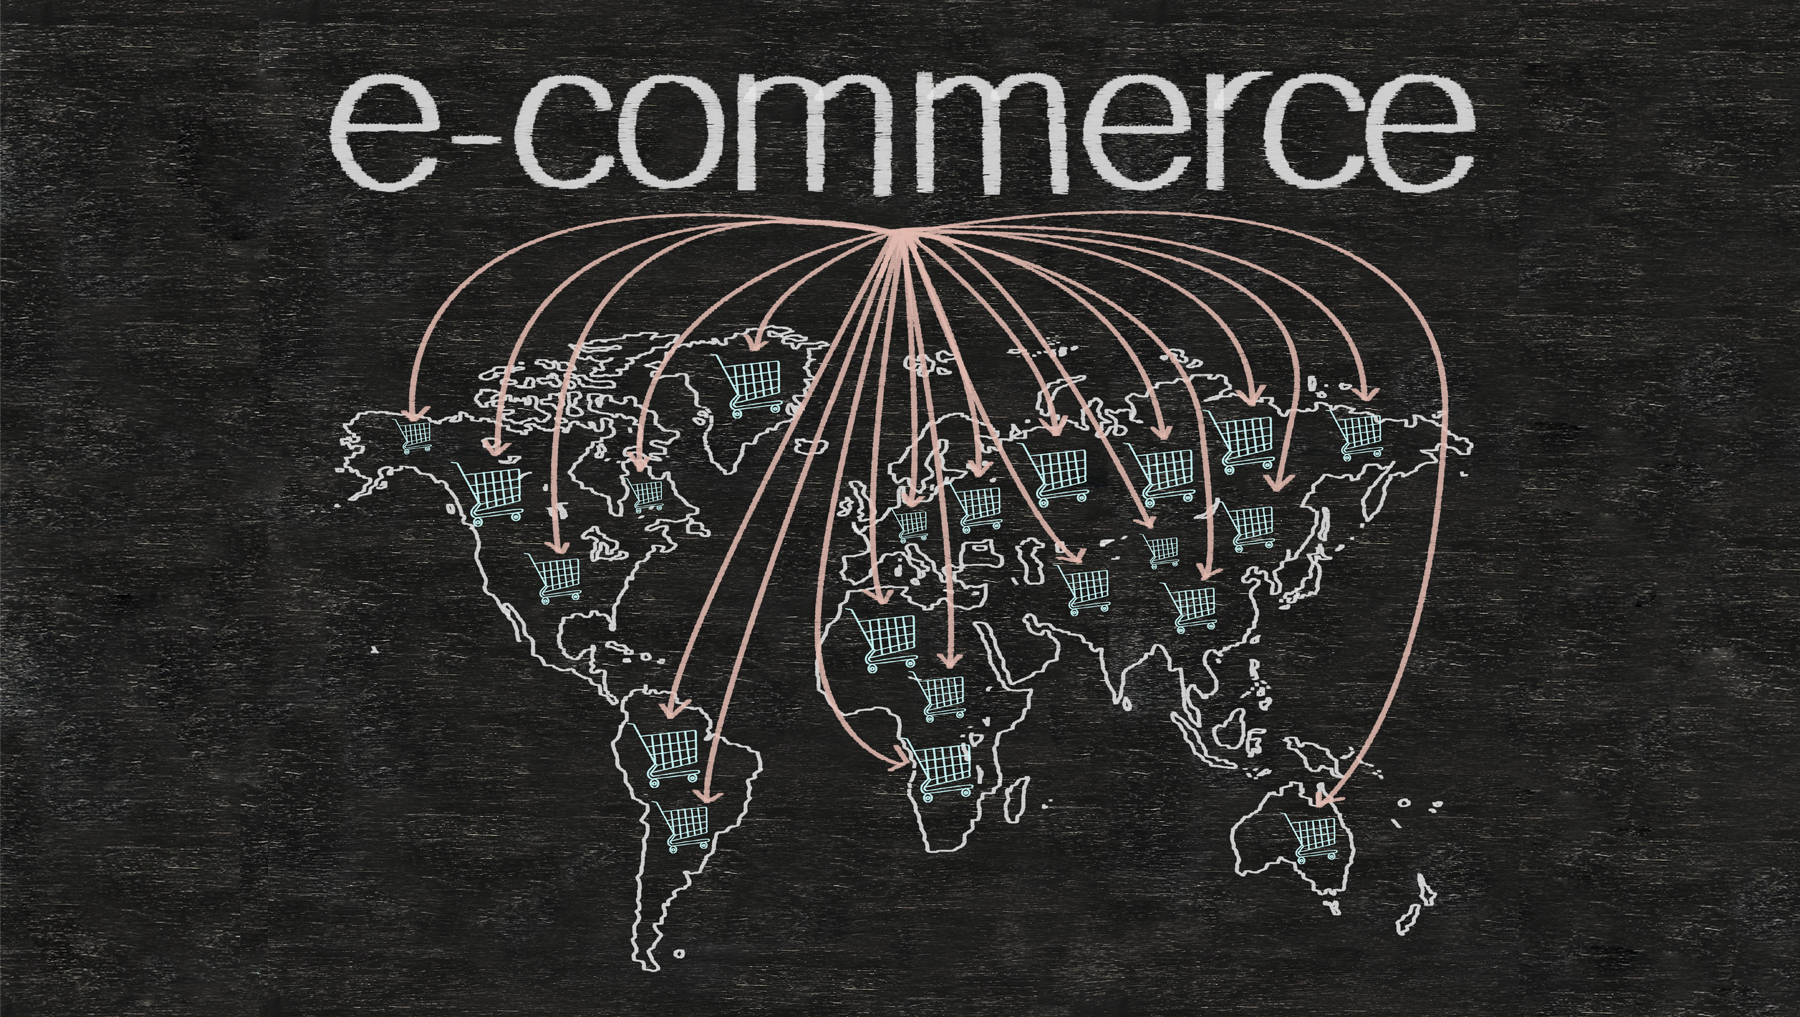 Types of E-commerce in Simple Terms